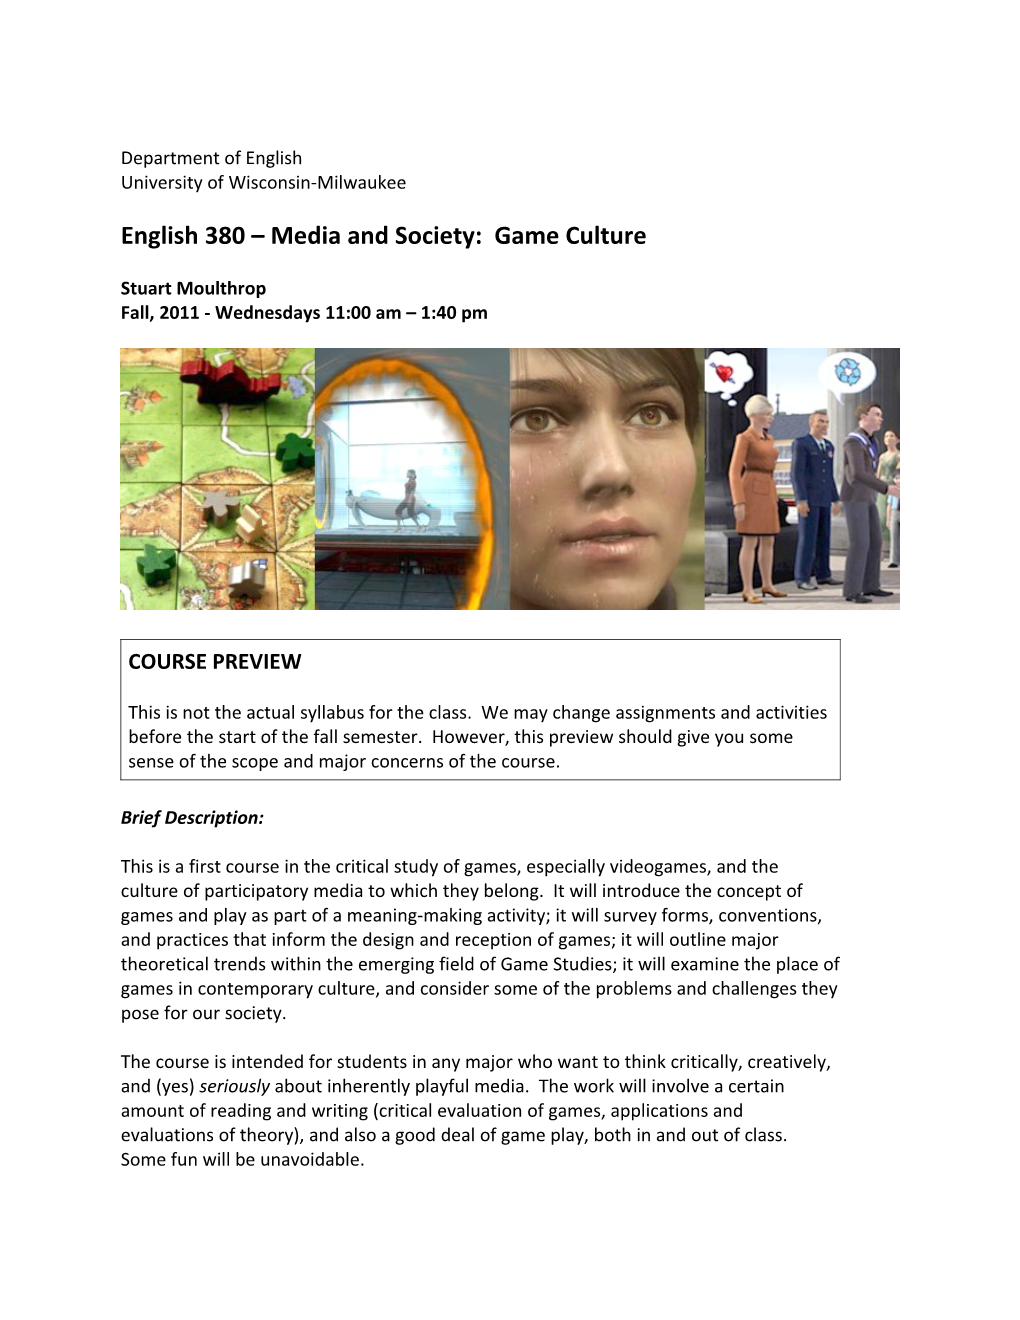 English 380 Media and Society: Game Culture